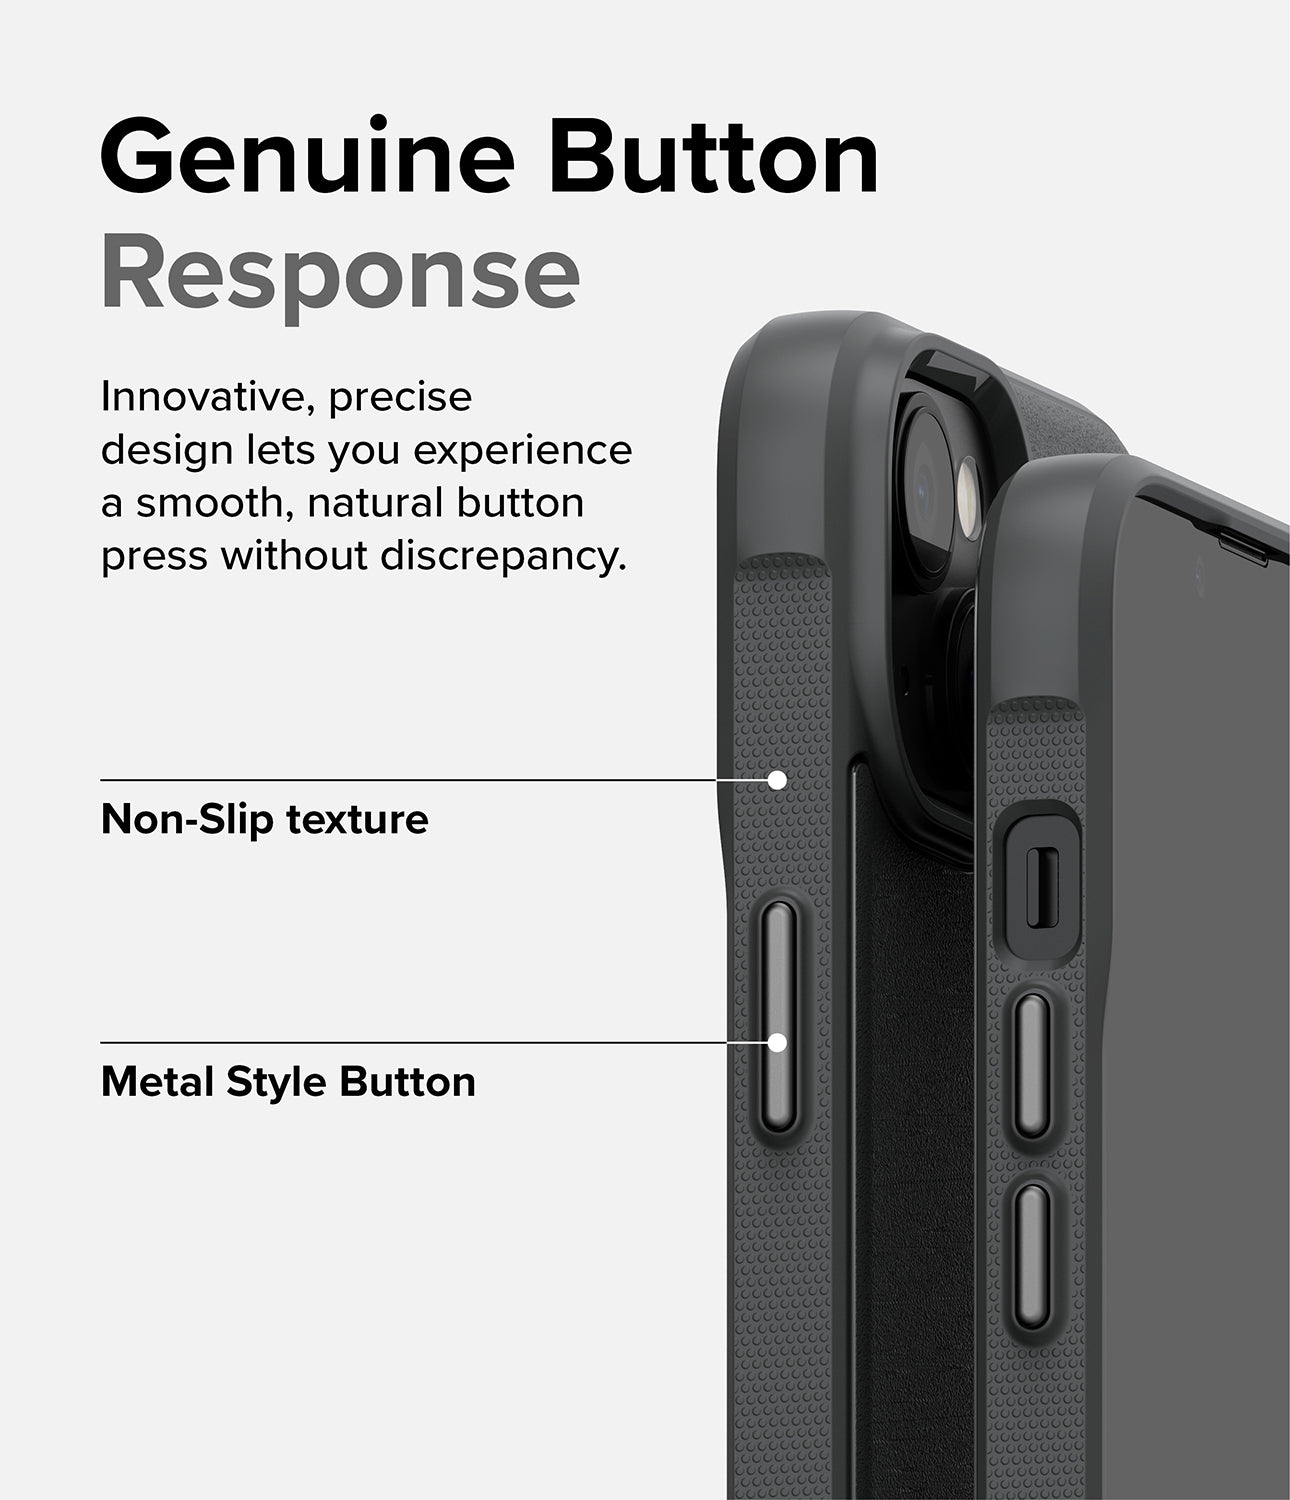 iPhone 14 Case | Onyx - Dark Gray - Genuine Button Response. Innovative, precise design lets your experience a smooth, natural button press without discrepancy. Non-Slip texture. Metal Style Button.